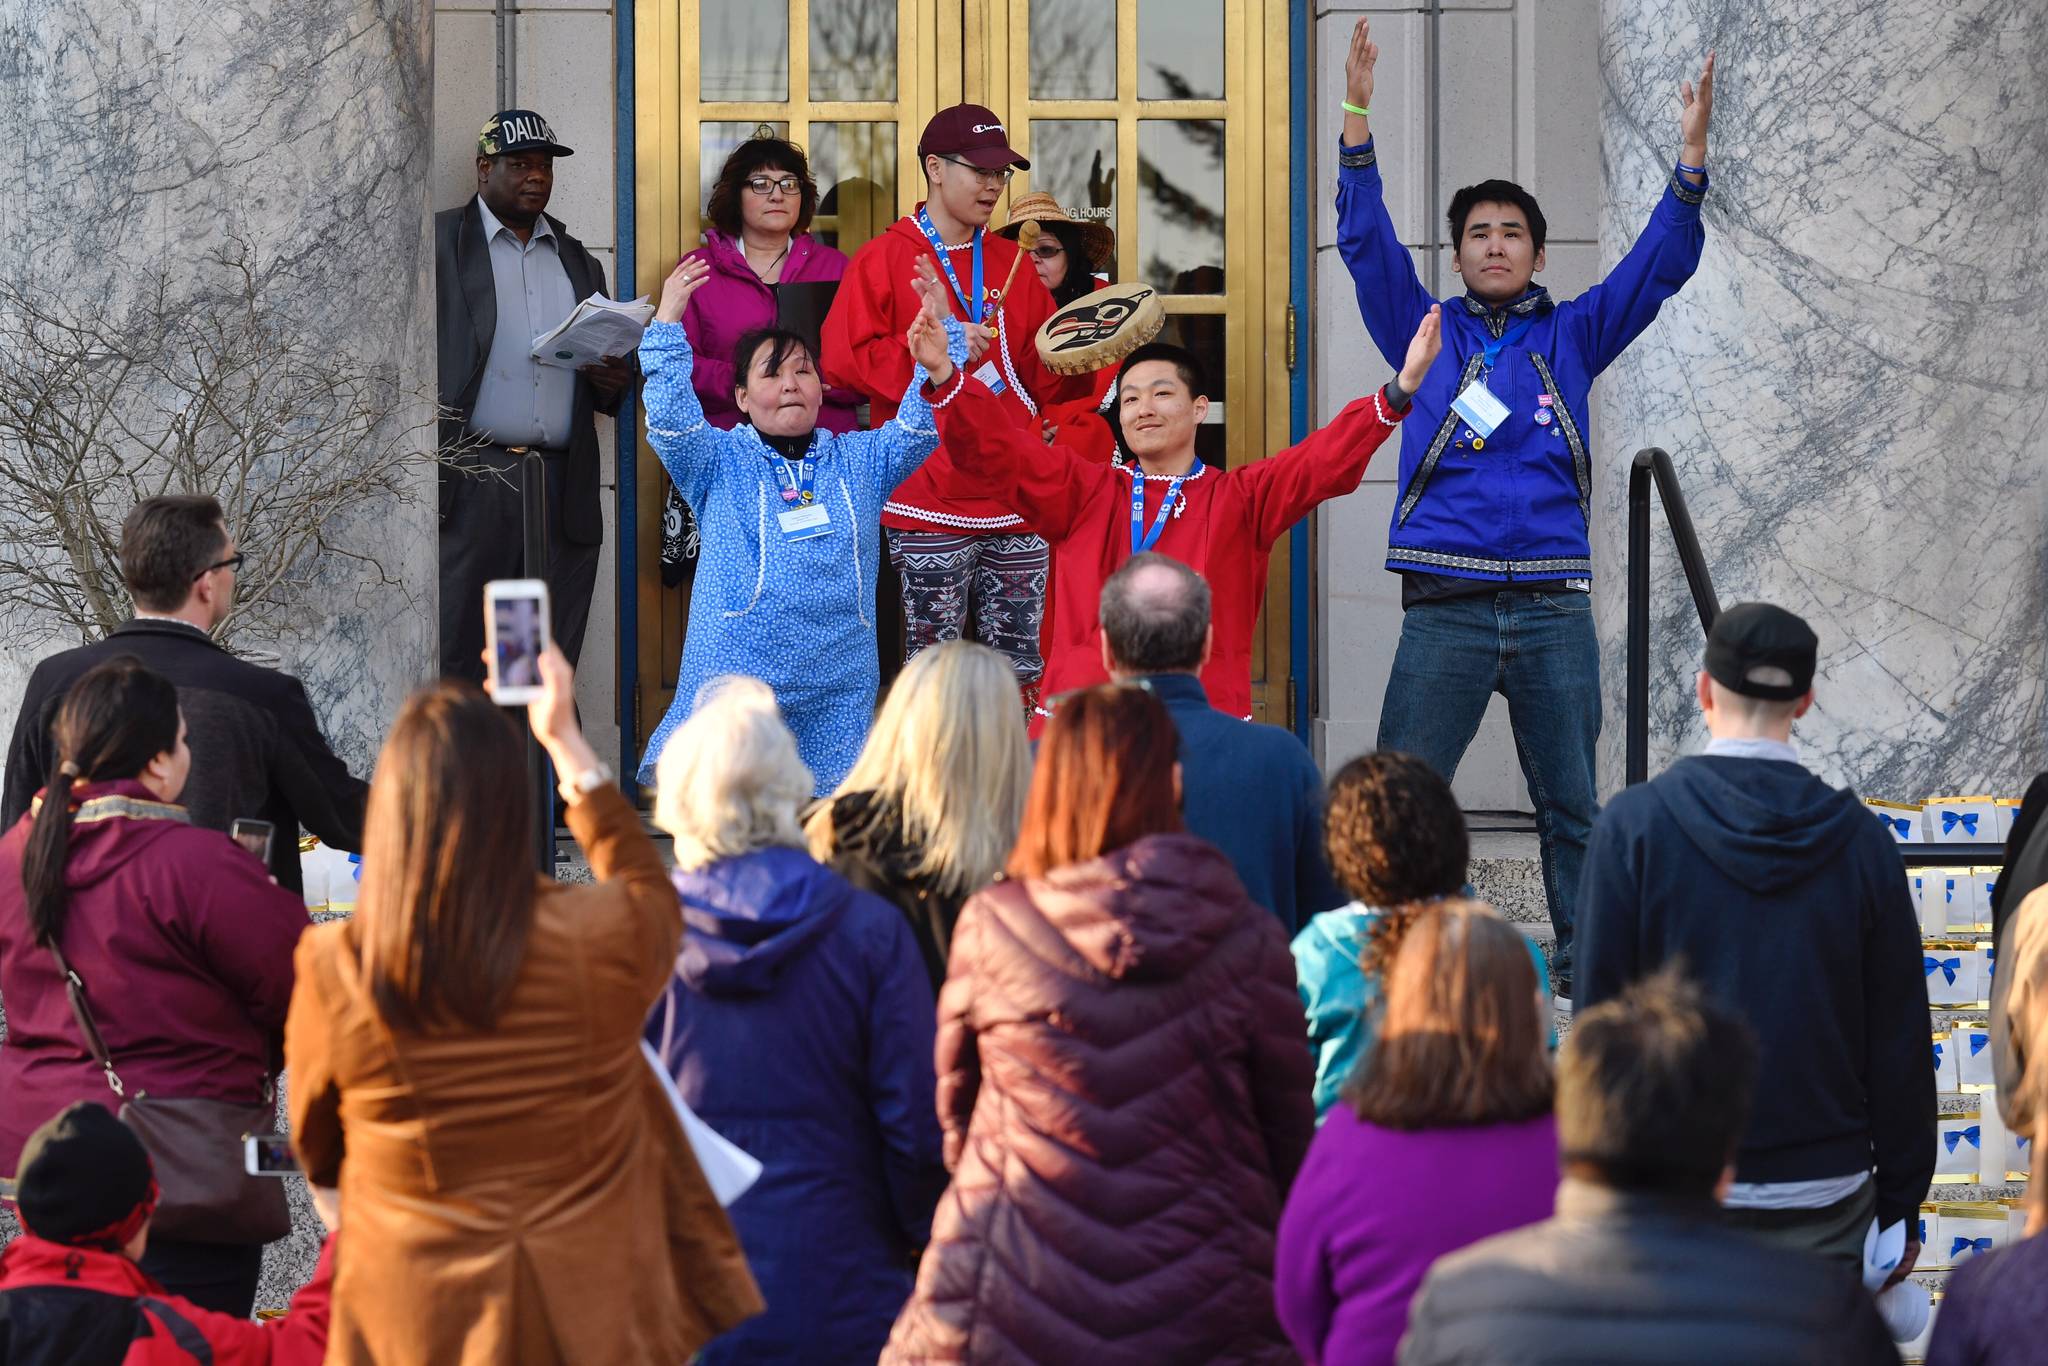 Wilton Charles, 19, of Toksook Bay, drums as advocates from the Alaska chapter of the American Foundation for Suicide Prevention perform a prayer dance at a candlelight vigil on the steps of the Capitol to raise awareness on Tuesday, March 26, 2019. The event was hosted by the AFSP Alaska Chapter, the Alaska Statewide Suicide Prevention Council and the Juneau Suicide Prevention Council. (Michael Penn | Juneau Empire)